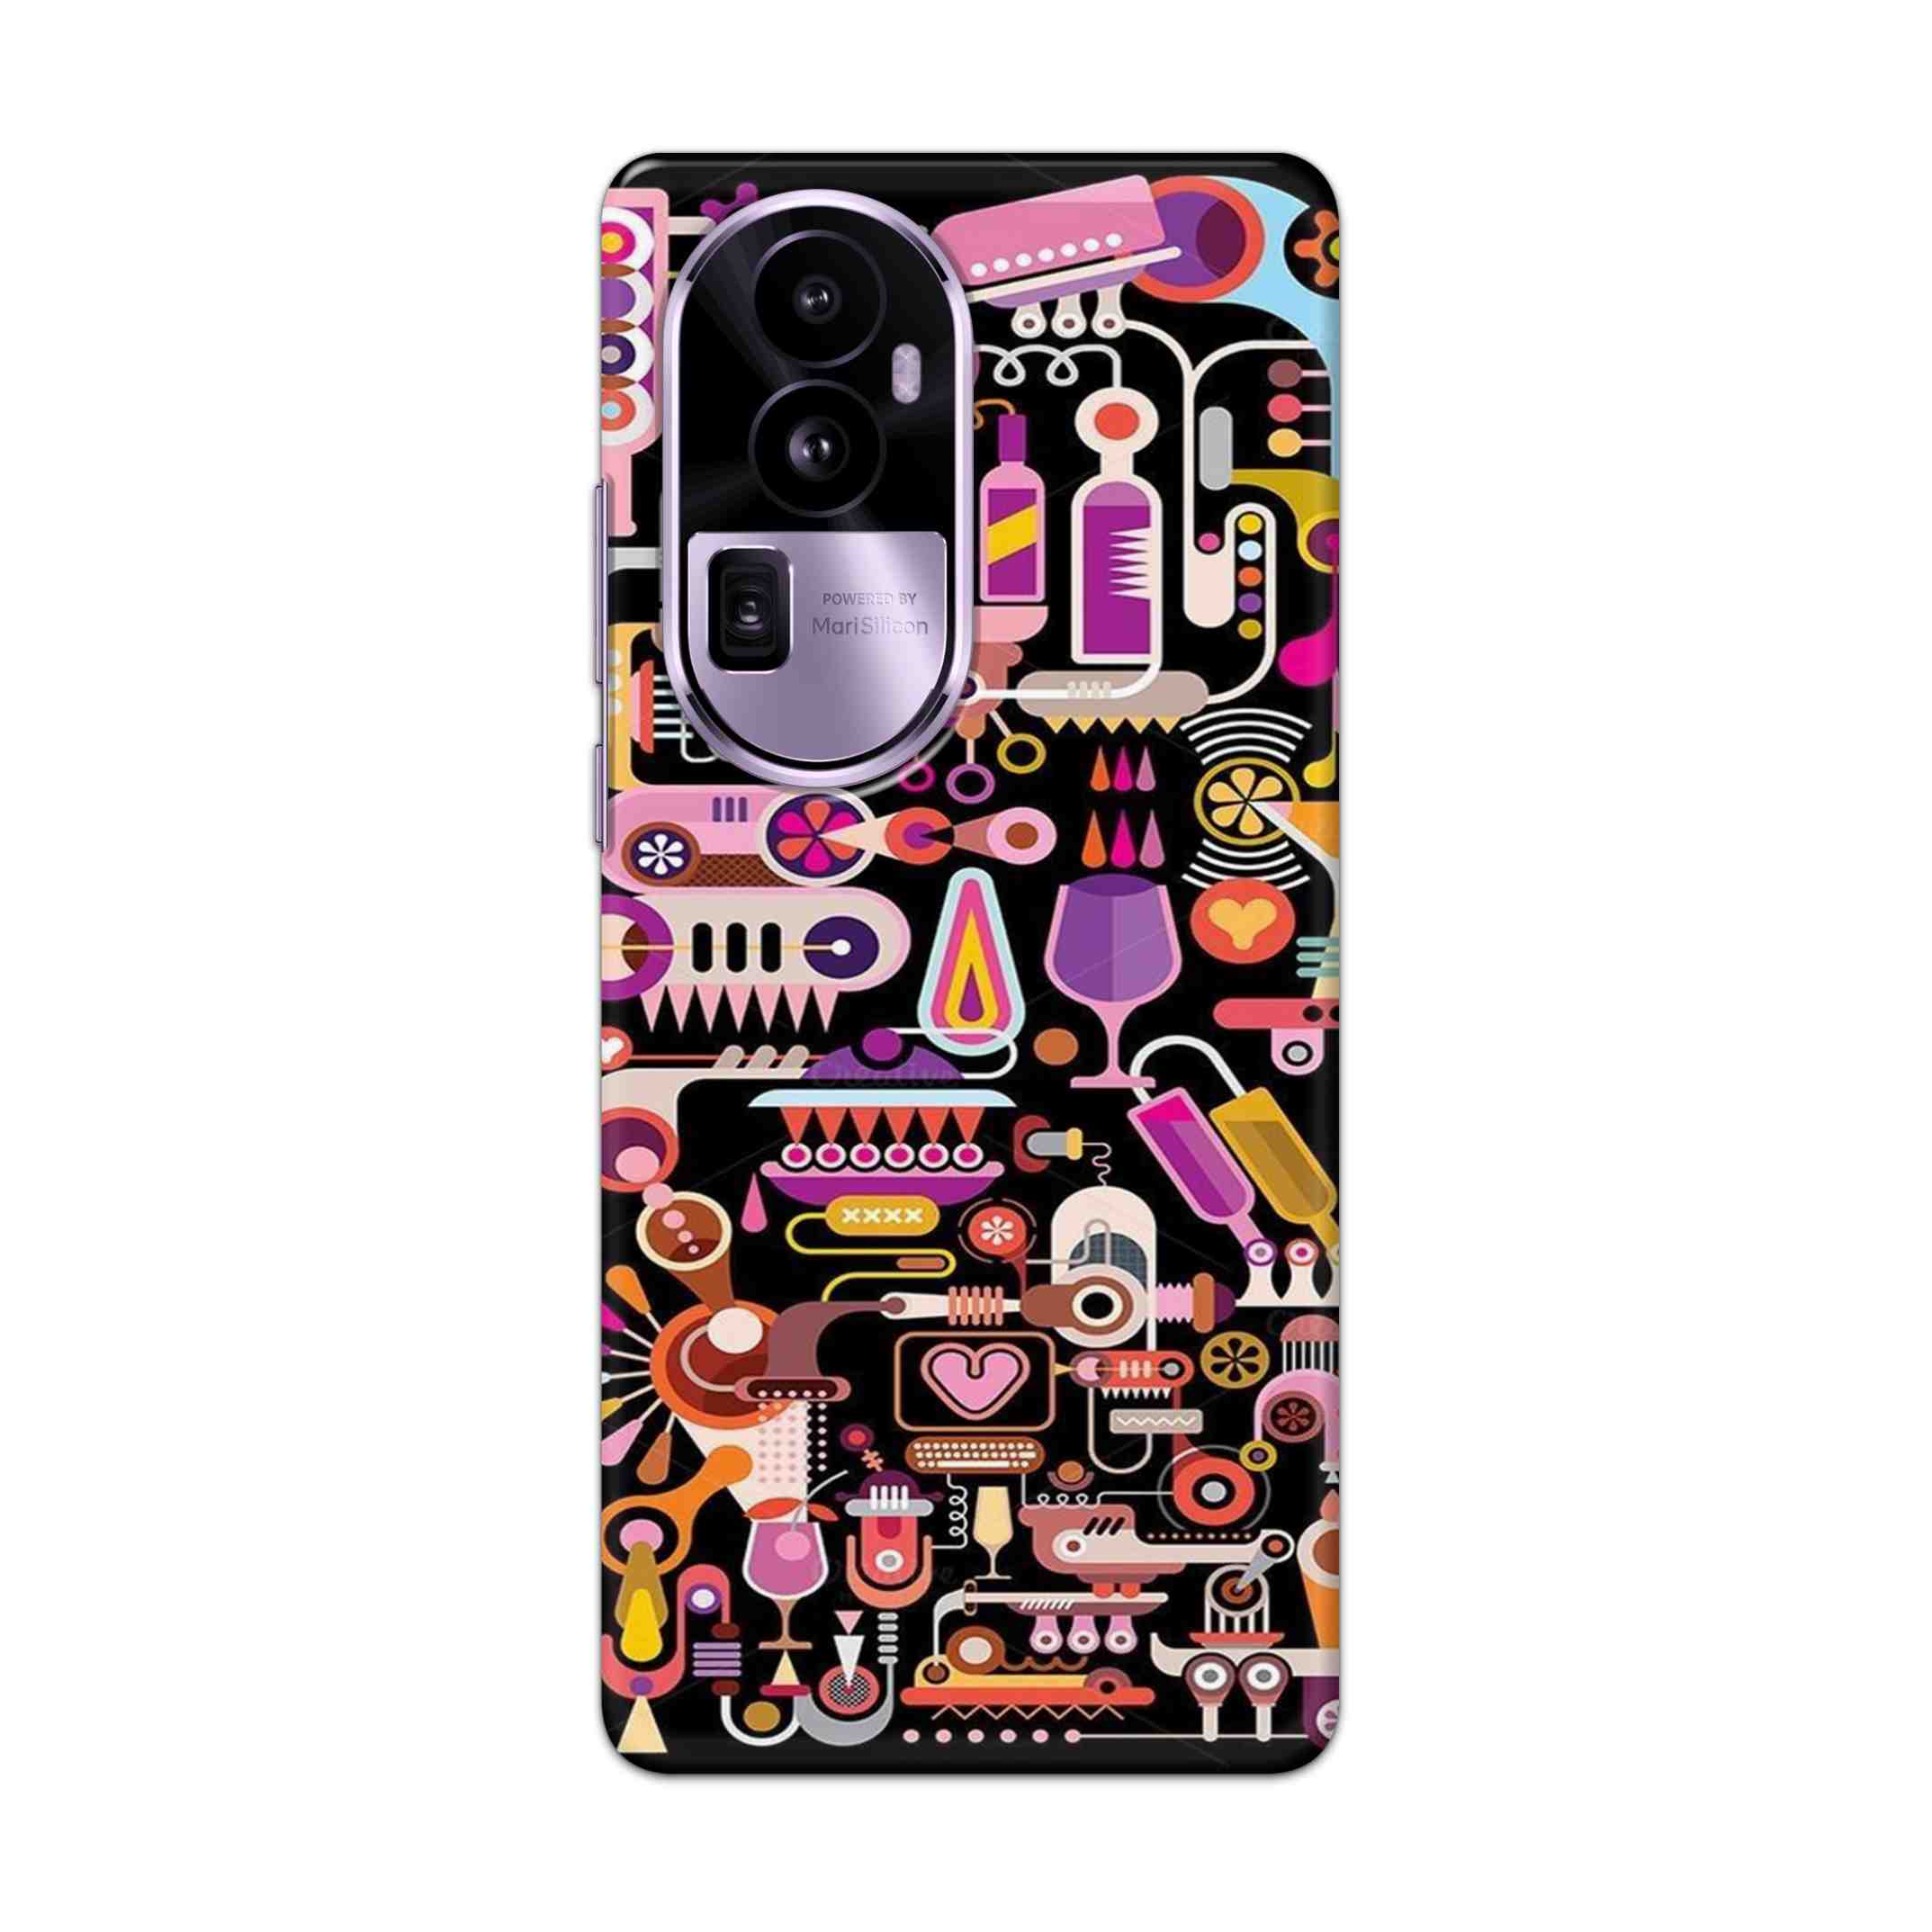 Buy Lab Art Hard Back Mobile Phone Case Cover For Oppo Reno 10 Pro Plus Online